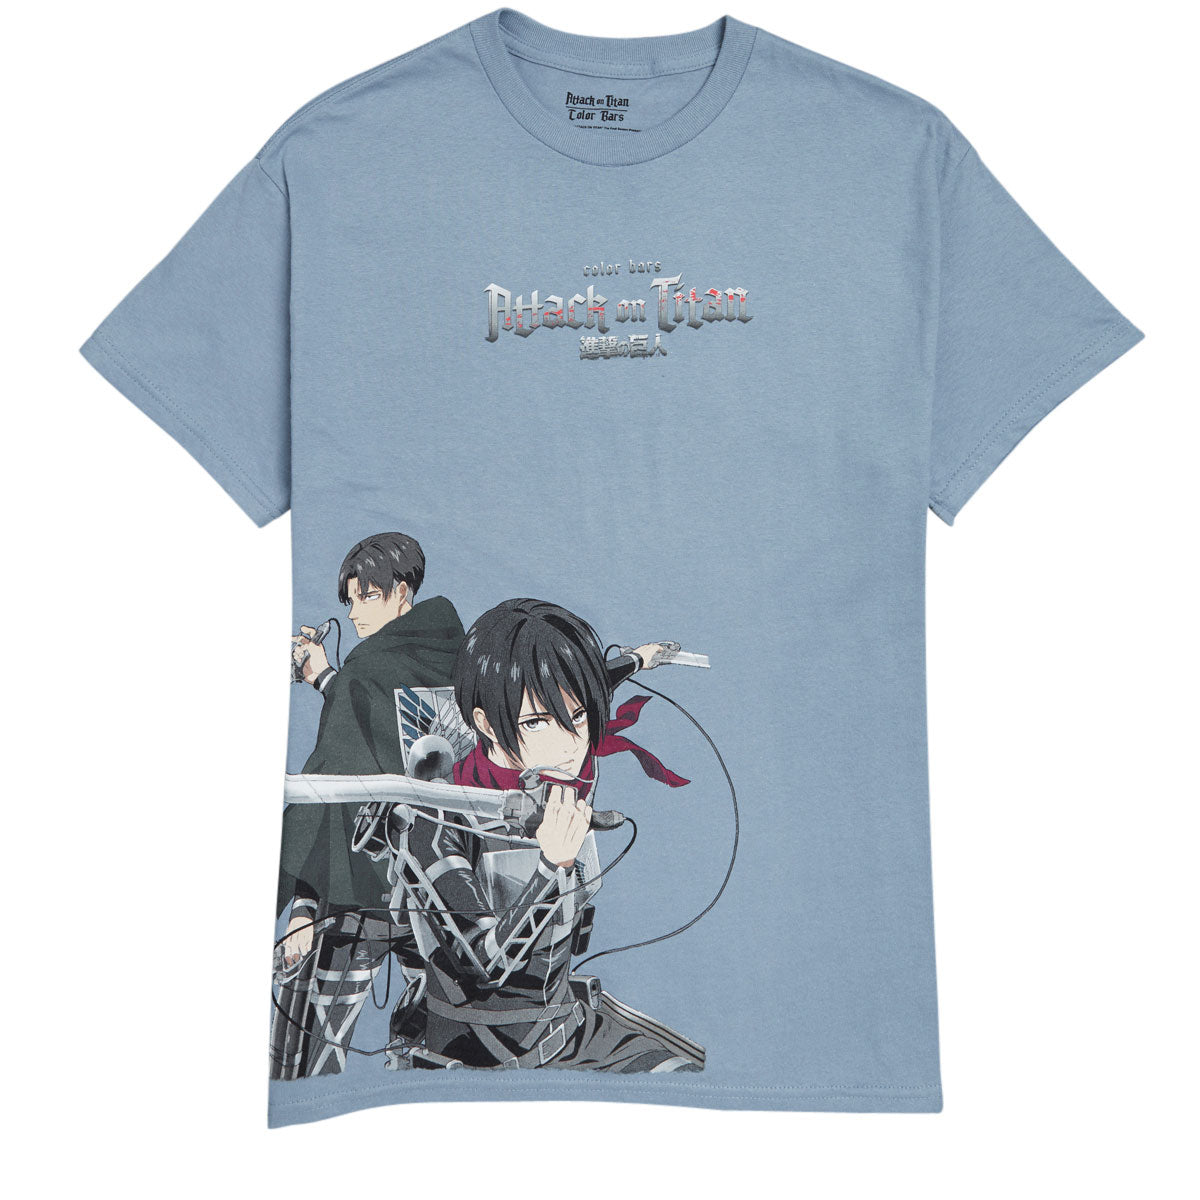 Color Bars x Attack on Titan Back to Back T-Shirt - Stone Blue image 1